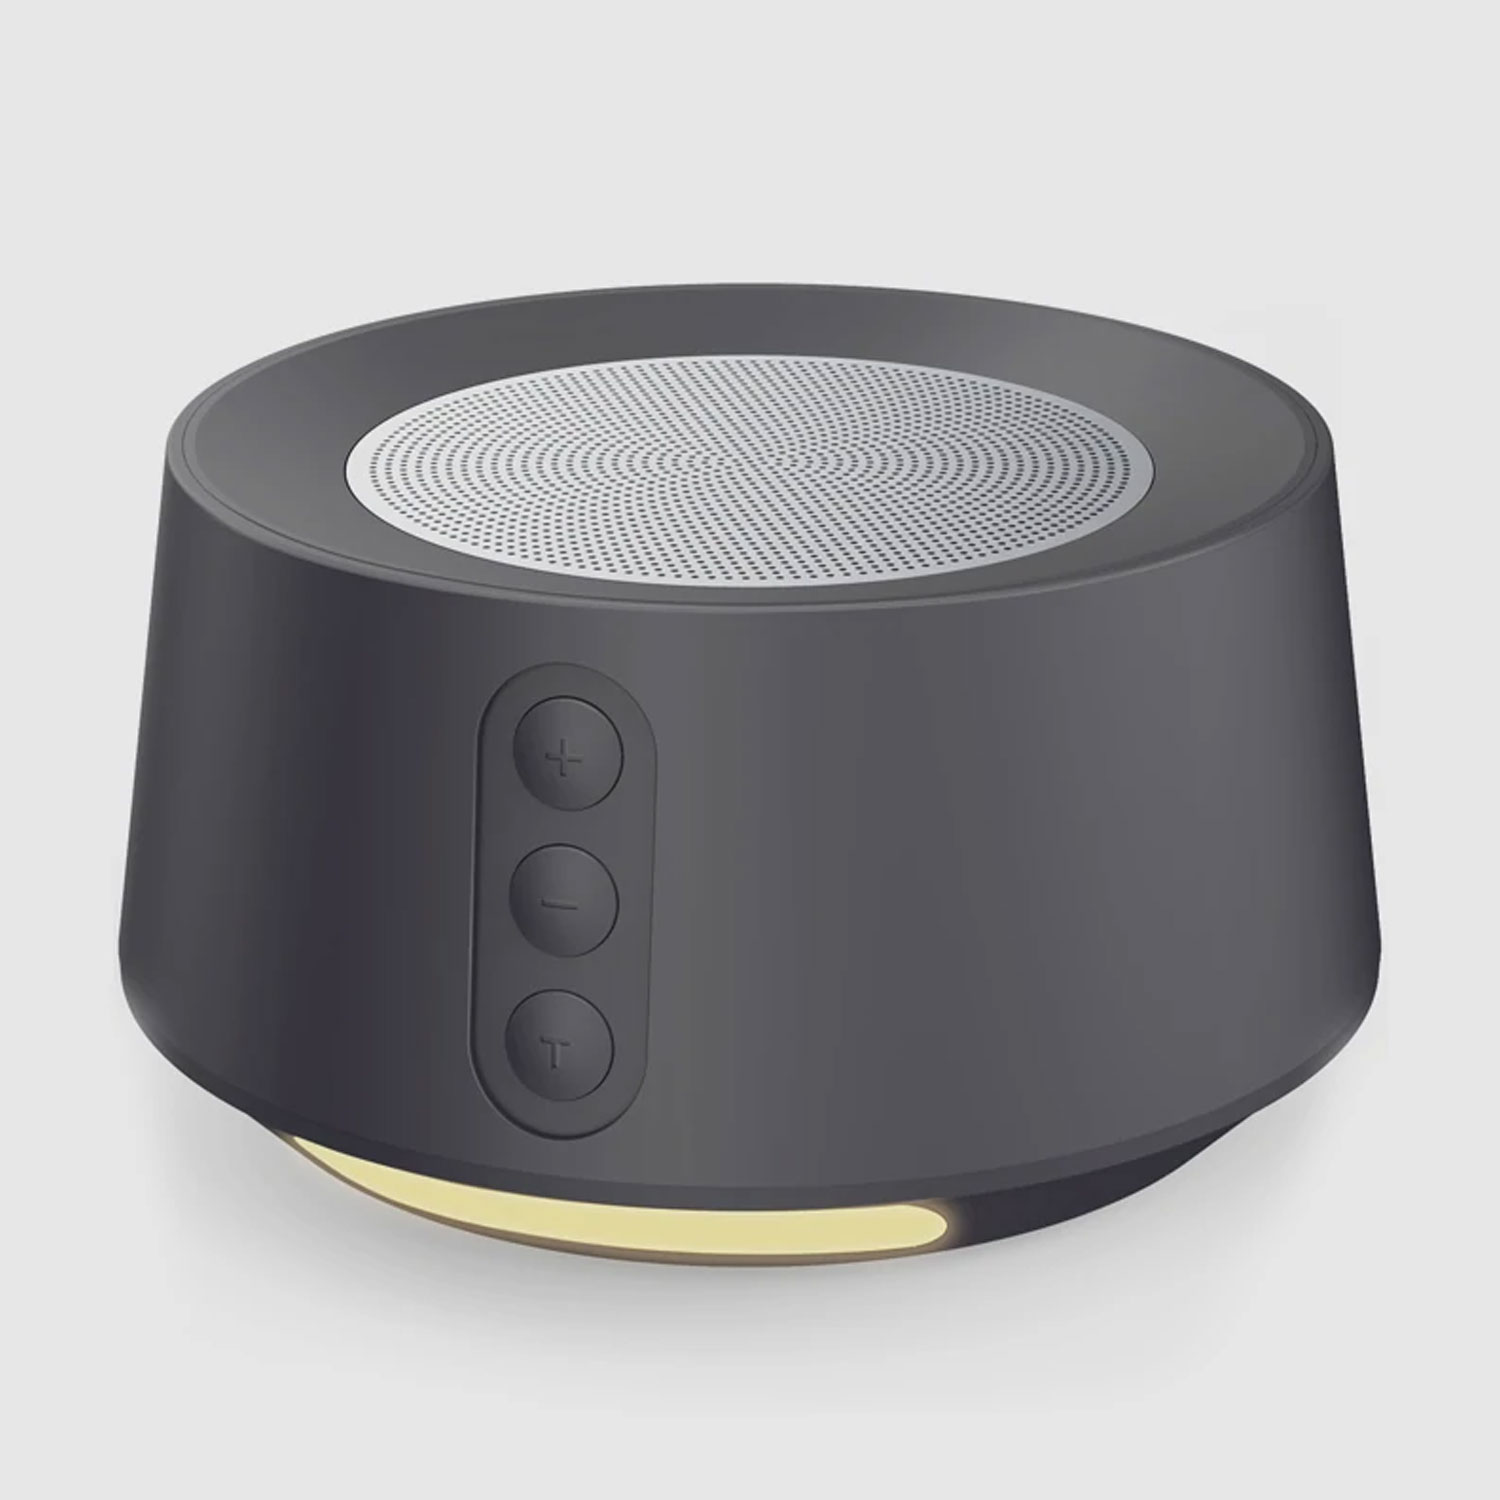 Full-featured Sound Machine And Night Light-Letsfit